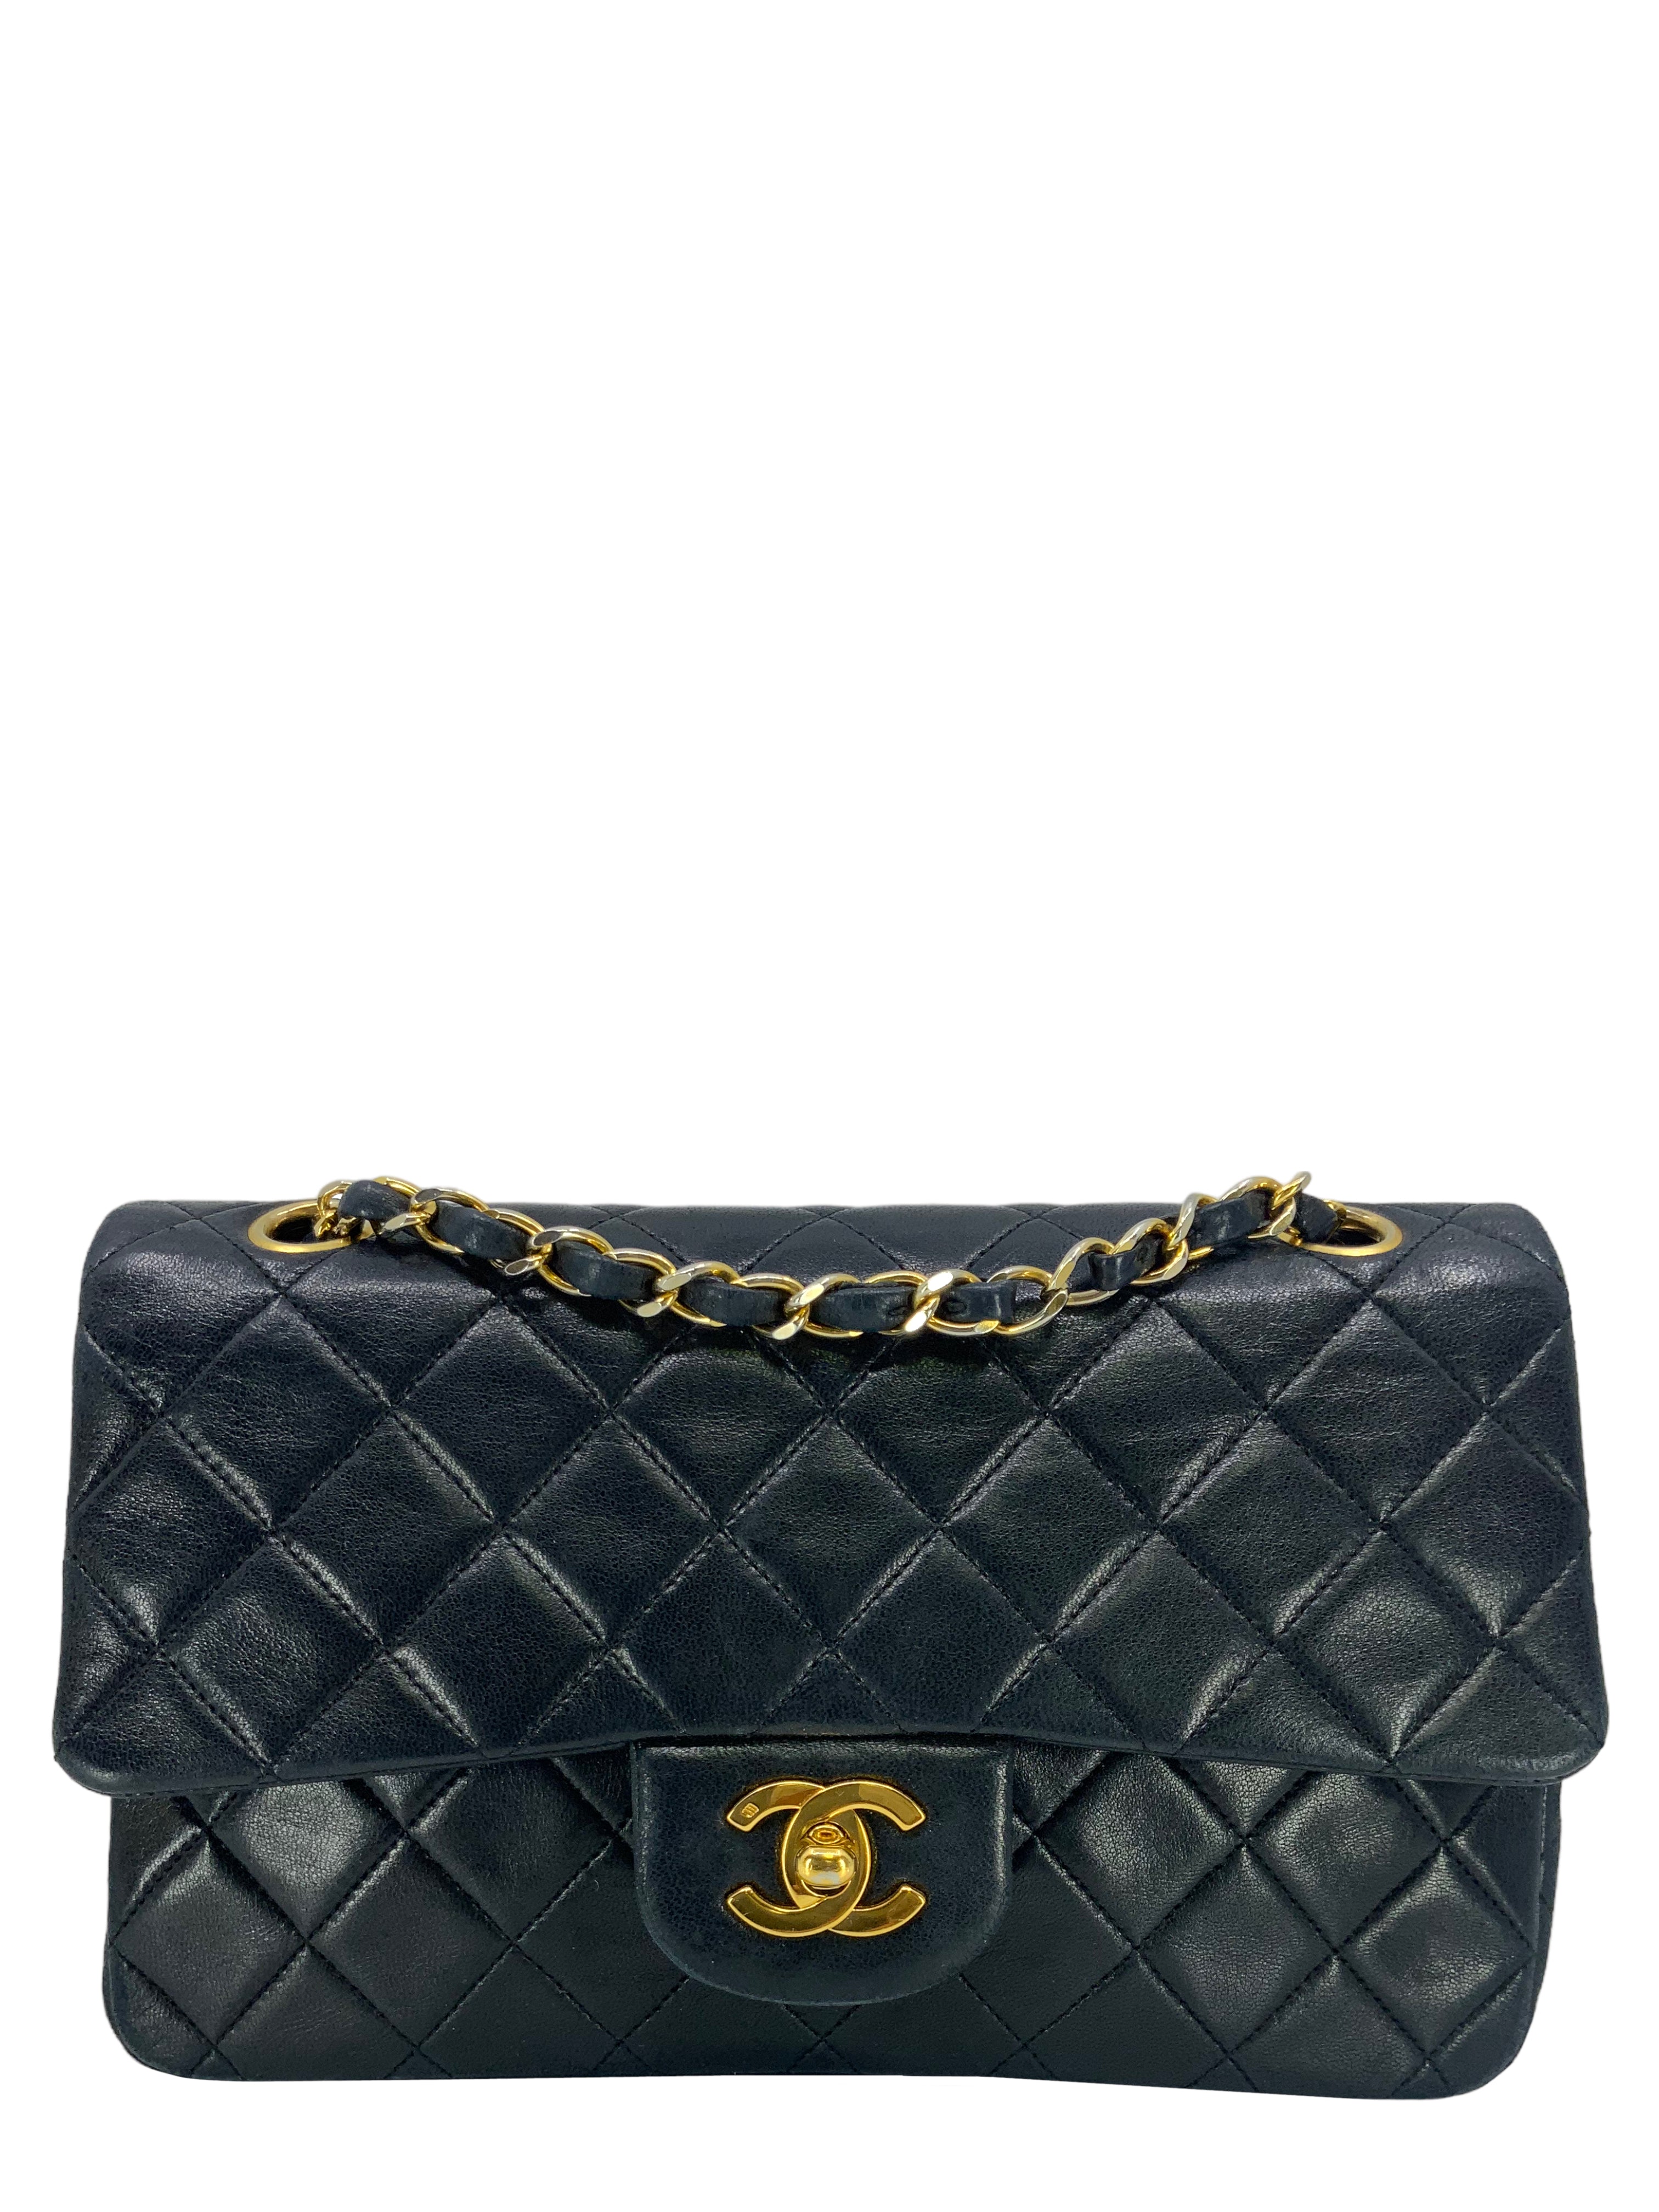 meget fint status tykkelse Chanel Quilted Lambskin Small Classic Double Flap Bag - Consigned Designs